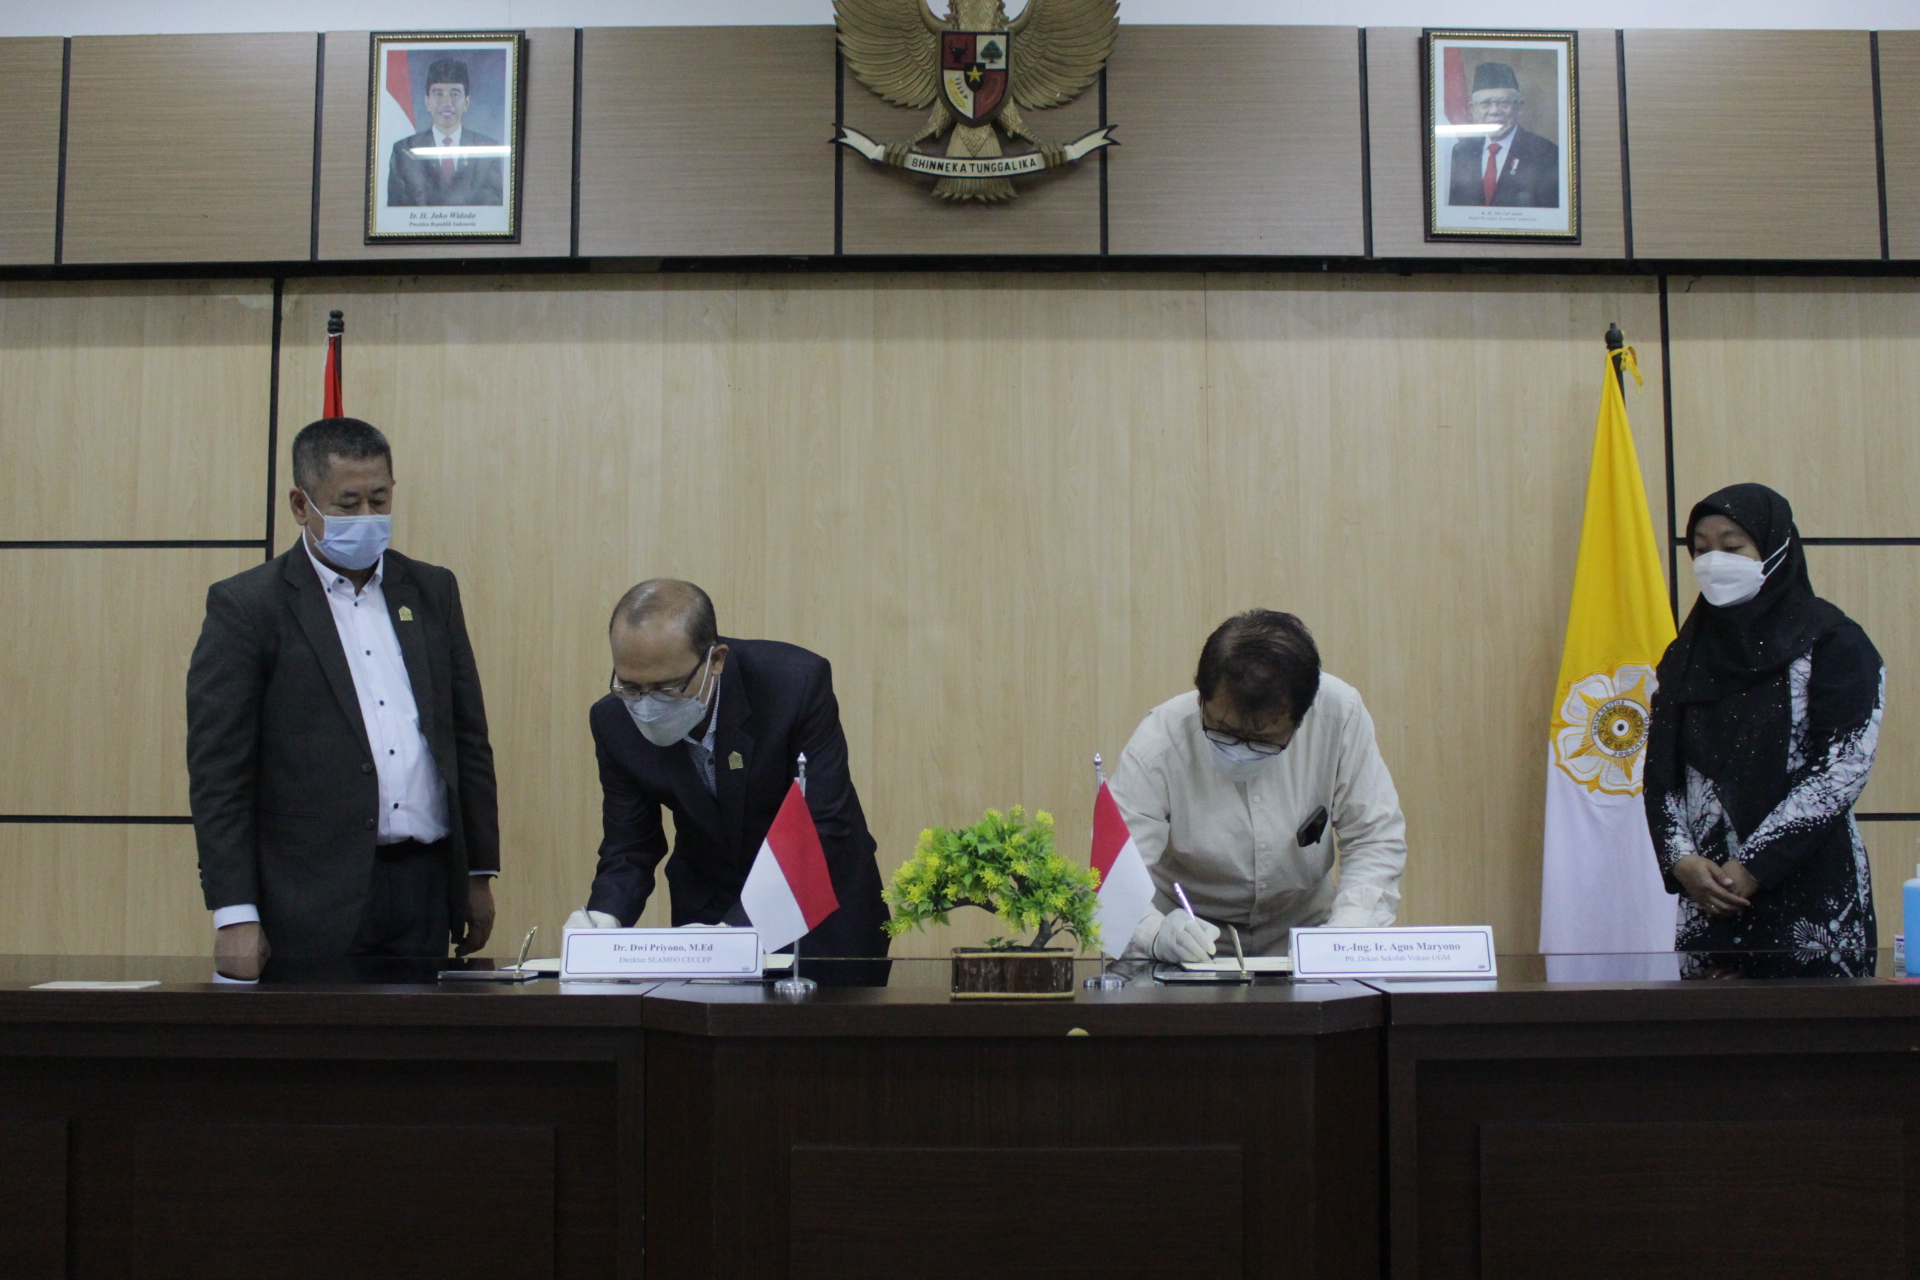 UGM signed an MoU with SEAMEO CECCEP